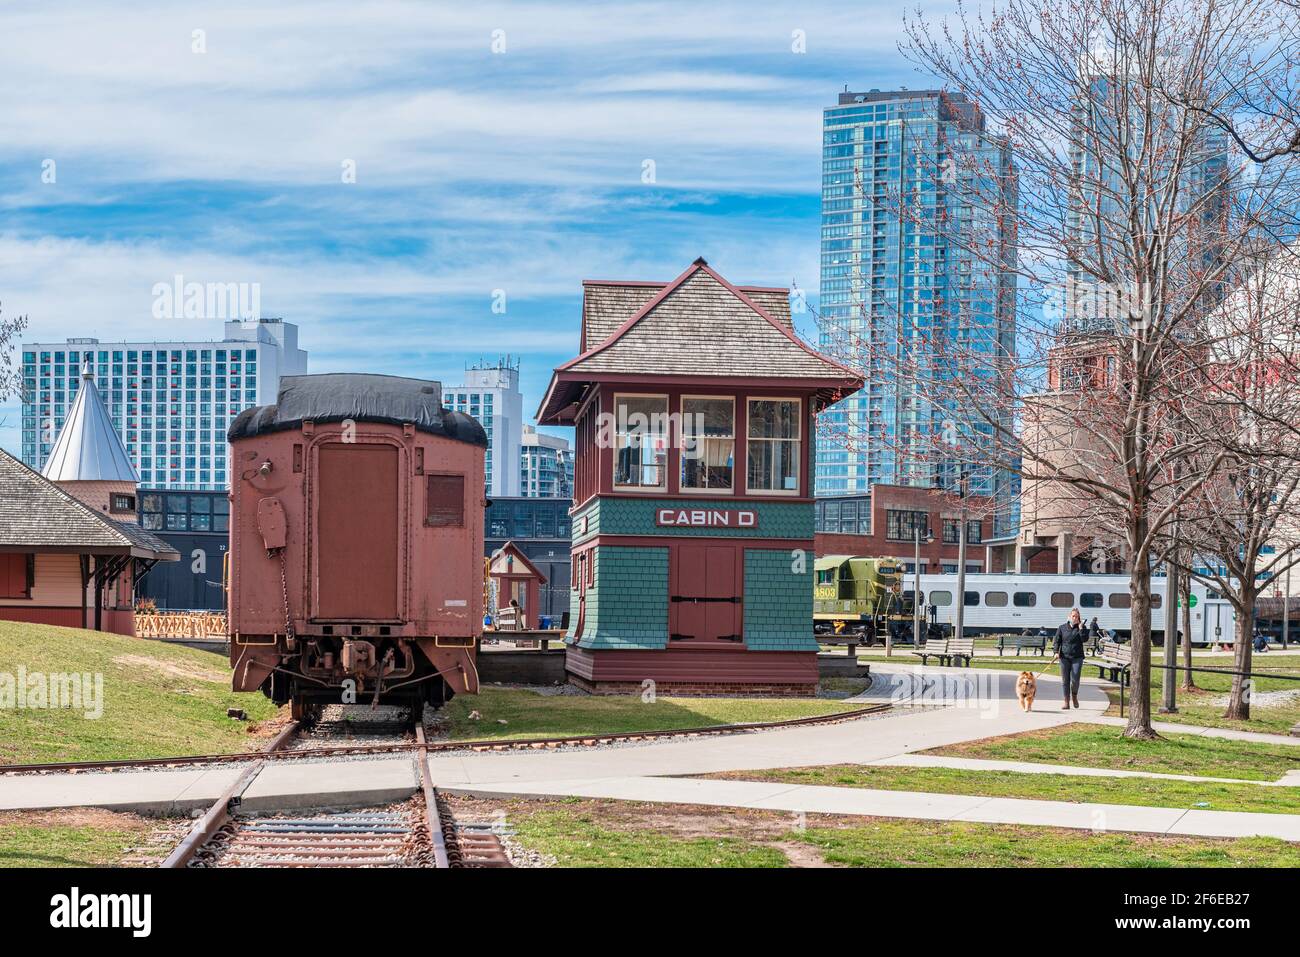 Empty Toronto Railway Museum in the Roundhouse Park in the downtown district due to the Covid-19 pandemic, Toronto, Canada, 2021 Stock Photo